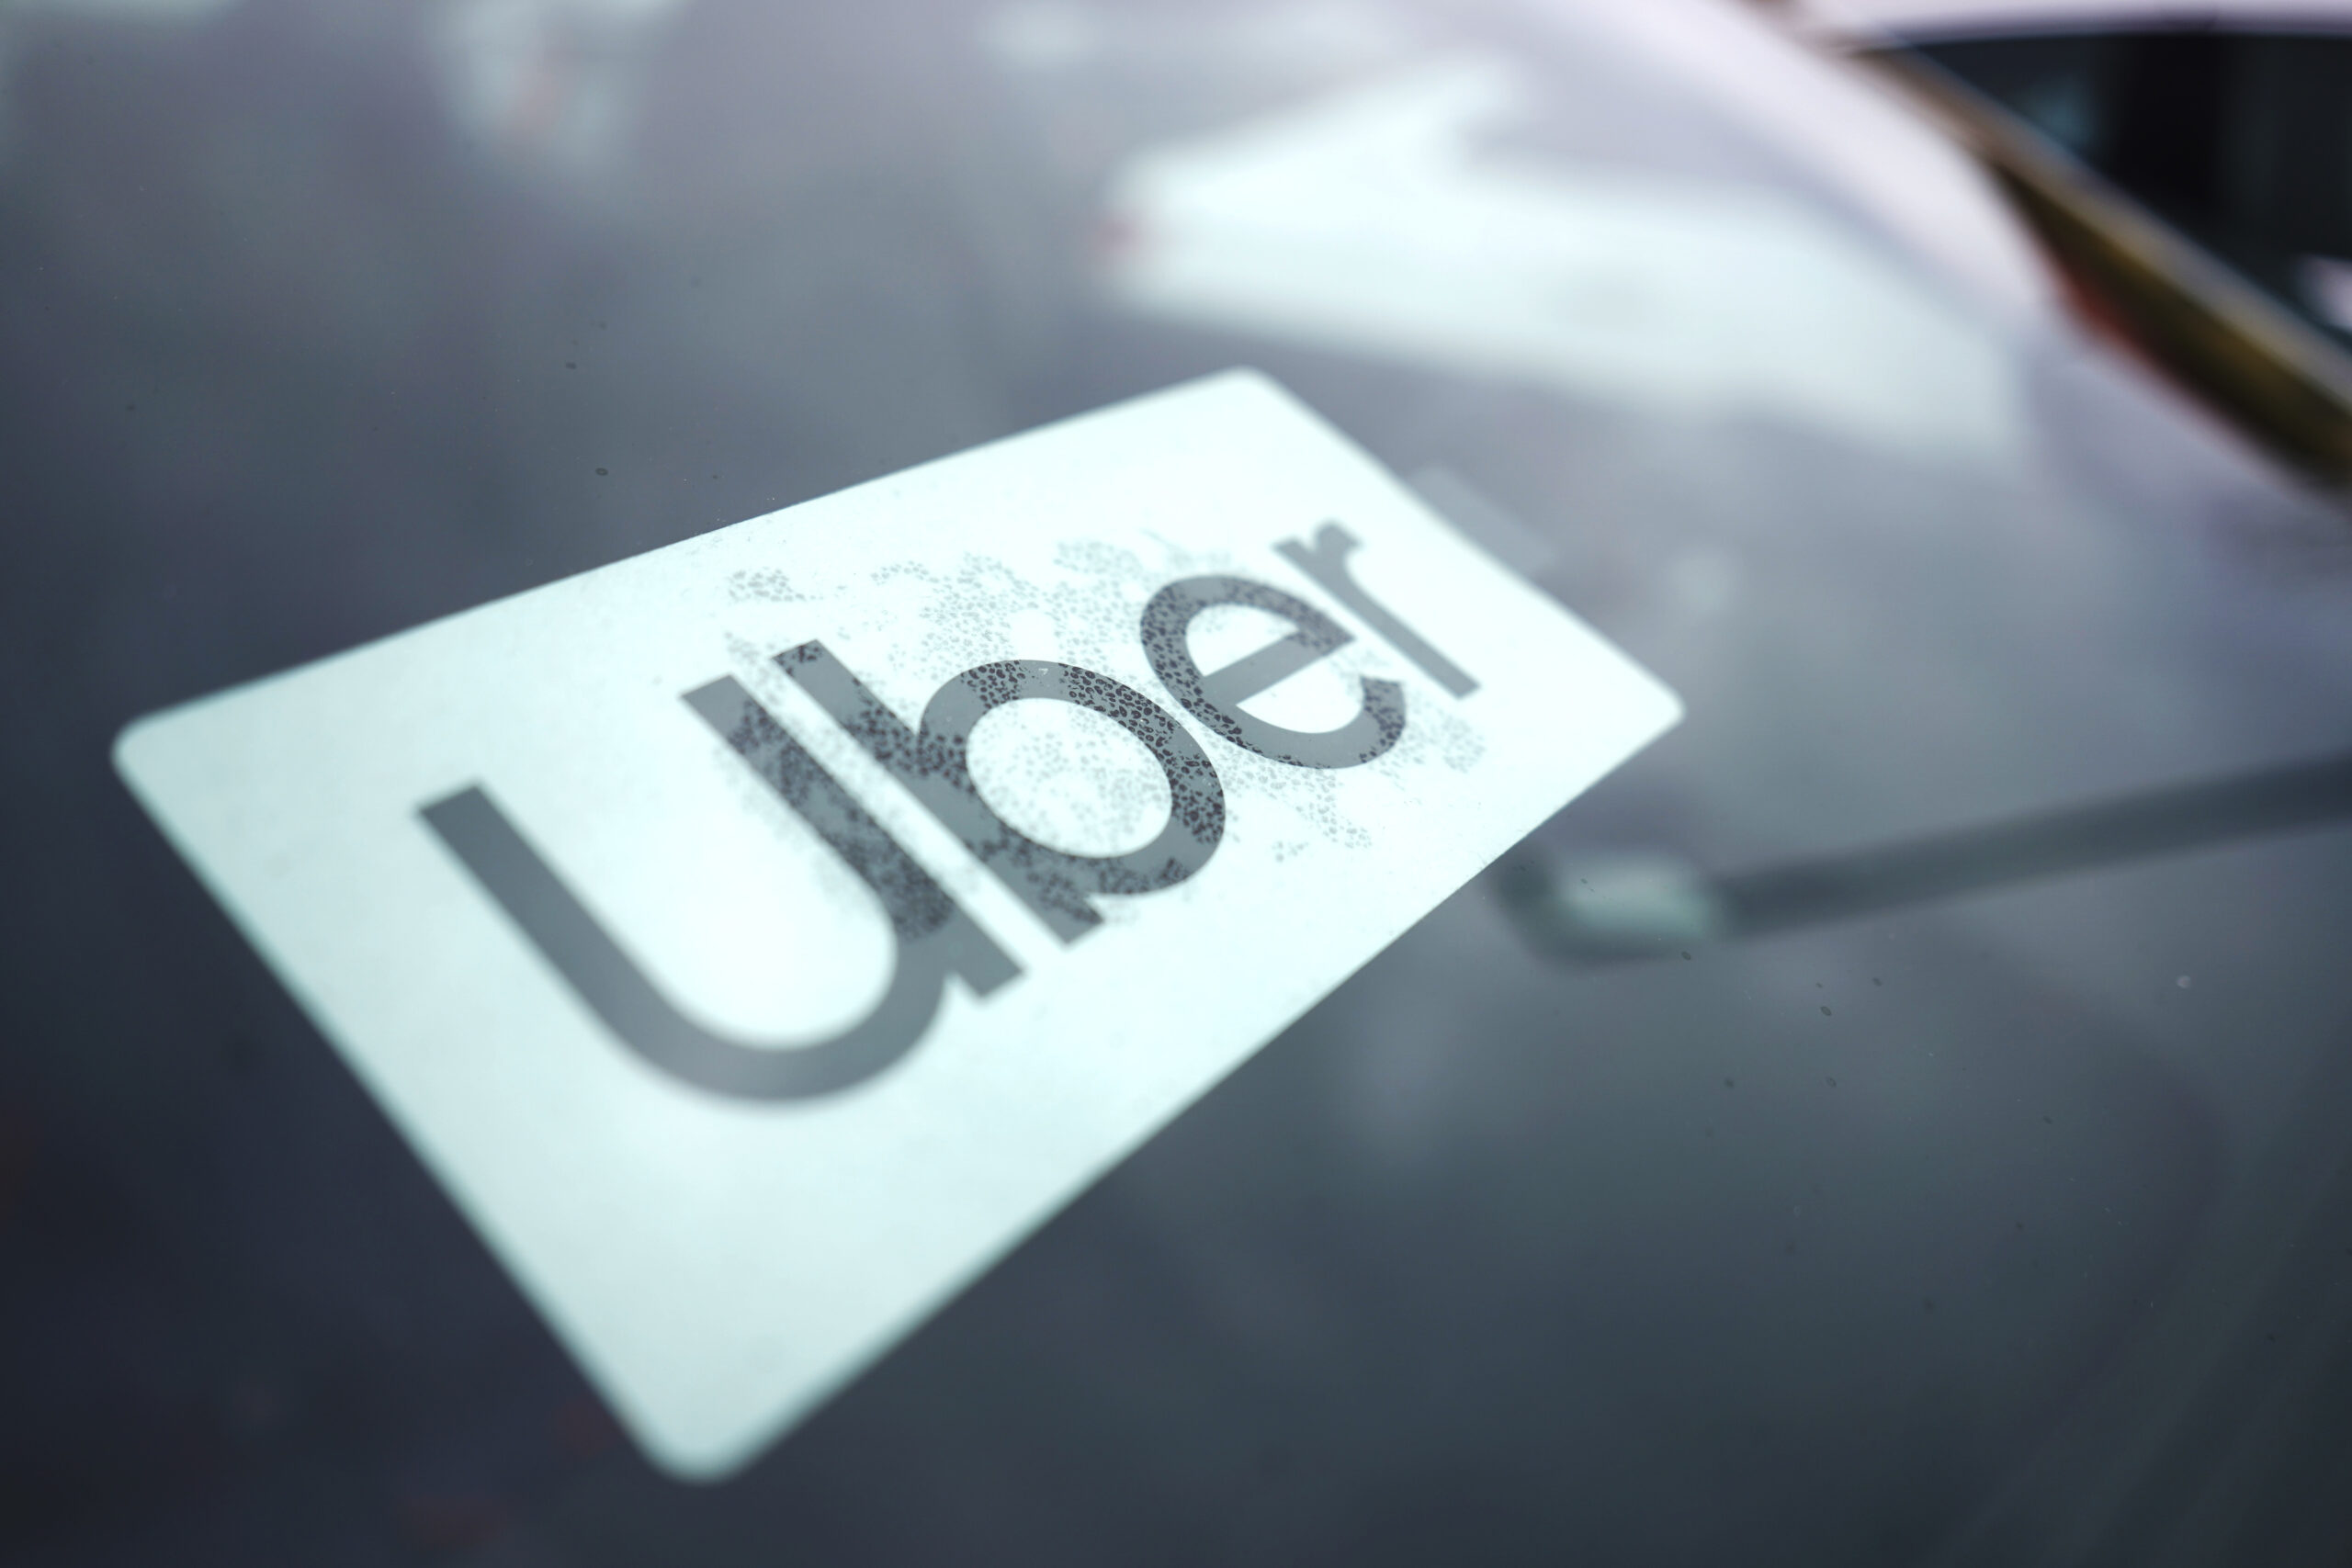 An Uber sign is displayed inside a car in Palatine, Ill., Thursday, Feb. 10, 2022. As Uber pushed into markets around the world, the ride-sharing service lobbied political leaders to relax labor and taxi laws and used a “kill switch″ to thwart regulators and law enforcement. Uber also channeled money through Bermuda and other tax havens and considered portraying violence against its drivers as a way to gain public sympathy. That's according to a report released Sunday by the International Consortium of Investigative Journalists. (AP Photo/Nam Y. Huh)